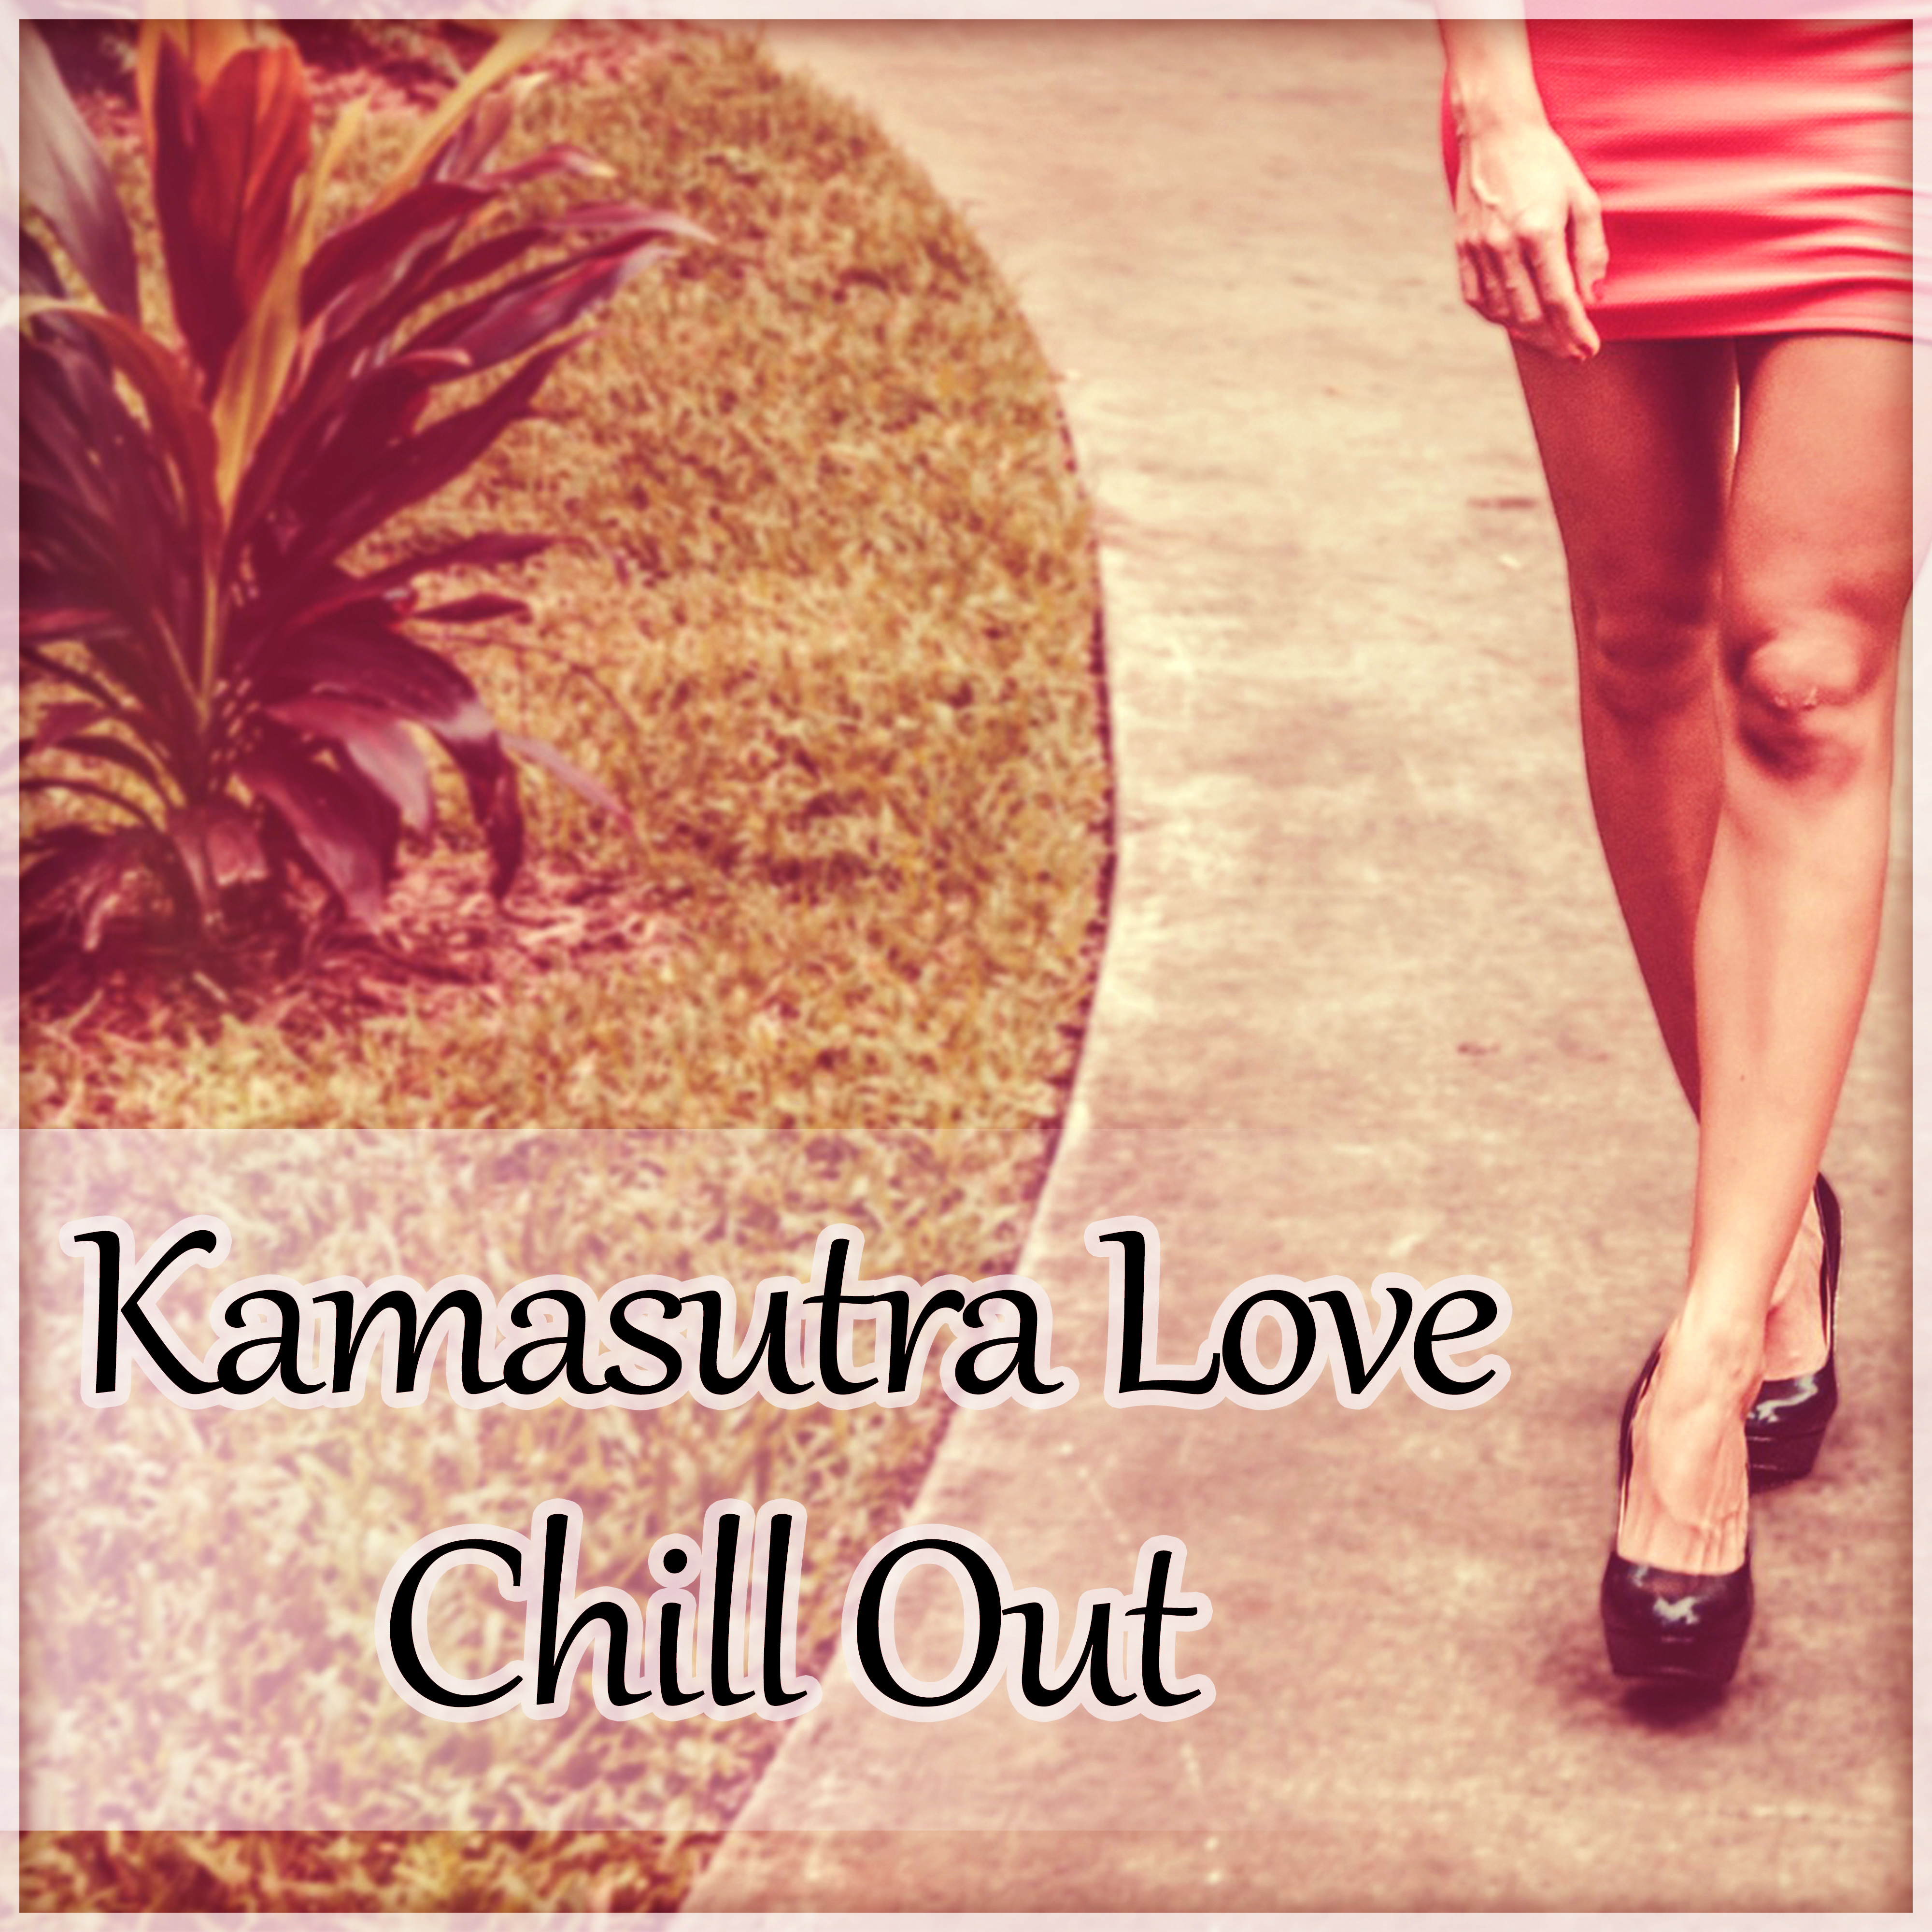 Kamasutra Love Chill Out  Chill Out Music for Making Love, Best Chill Sounds During